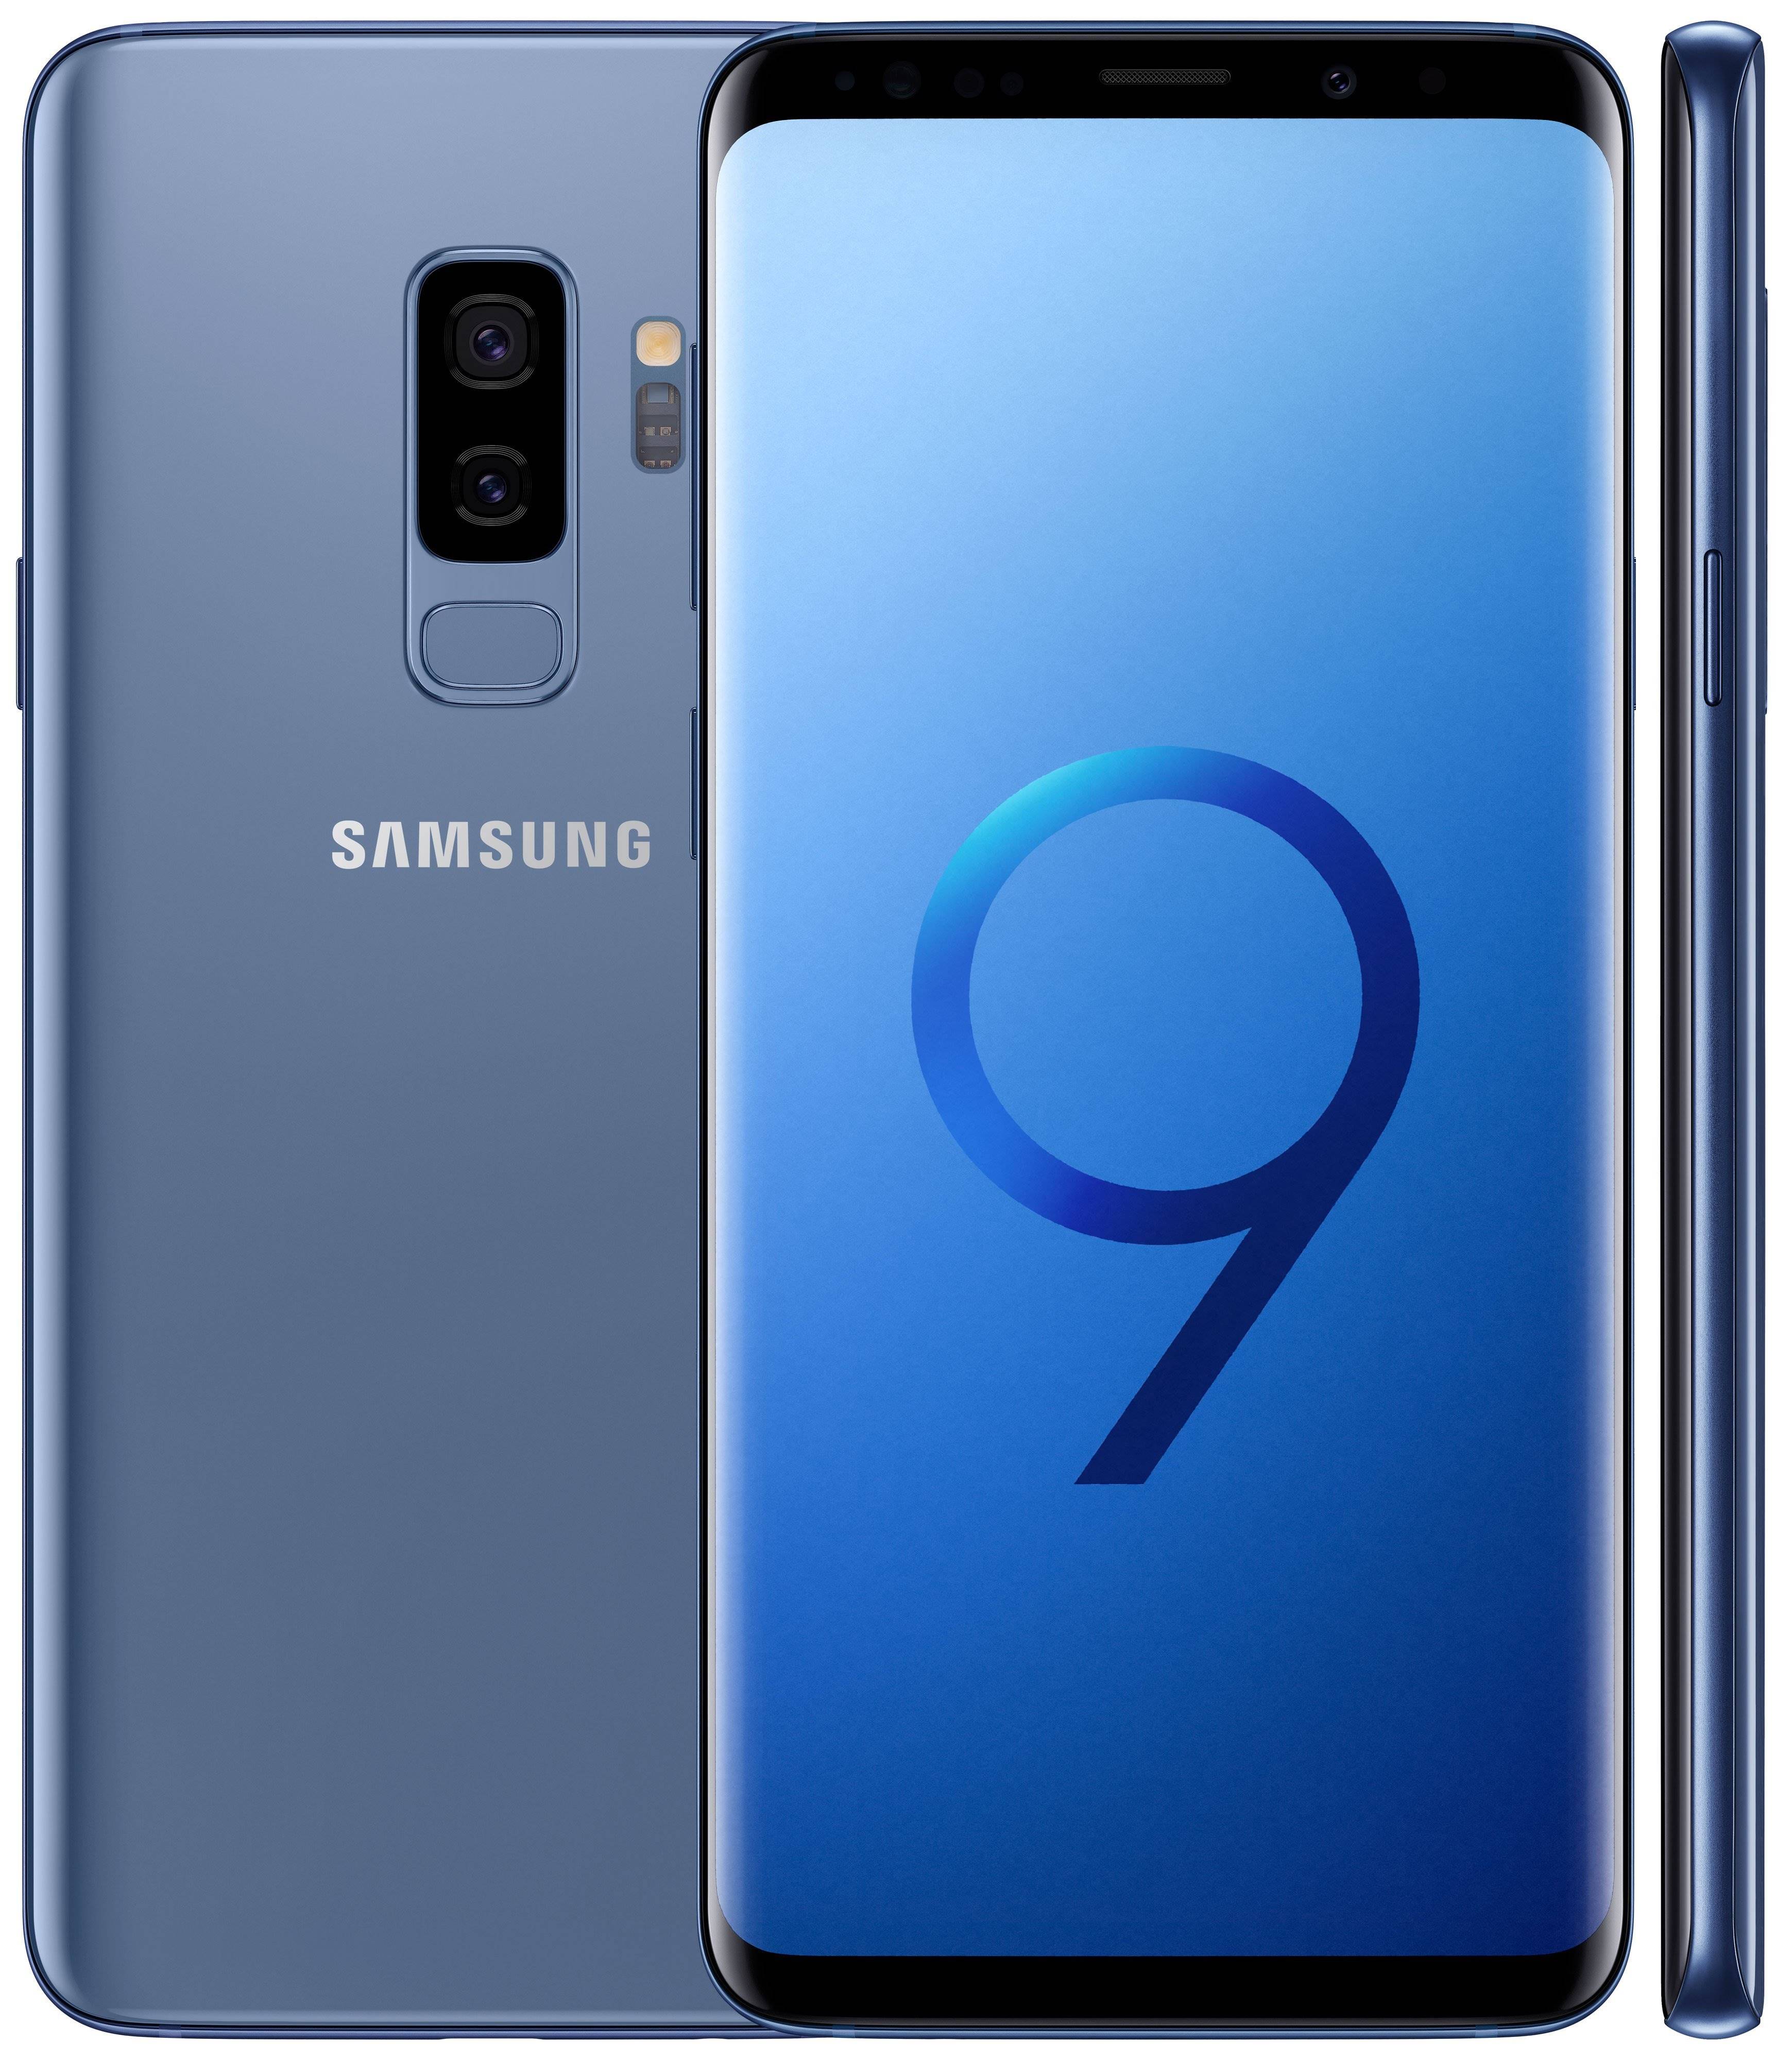 Samsung Galaxy S9 high resolution images 1